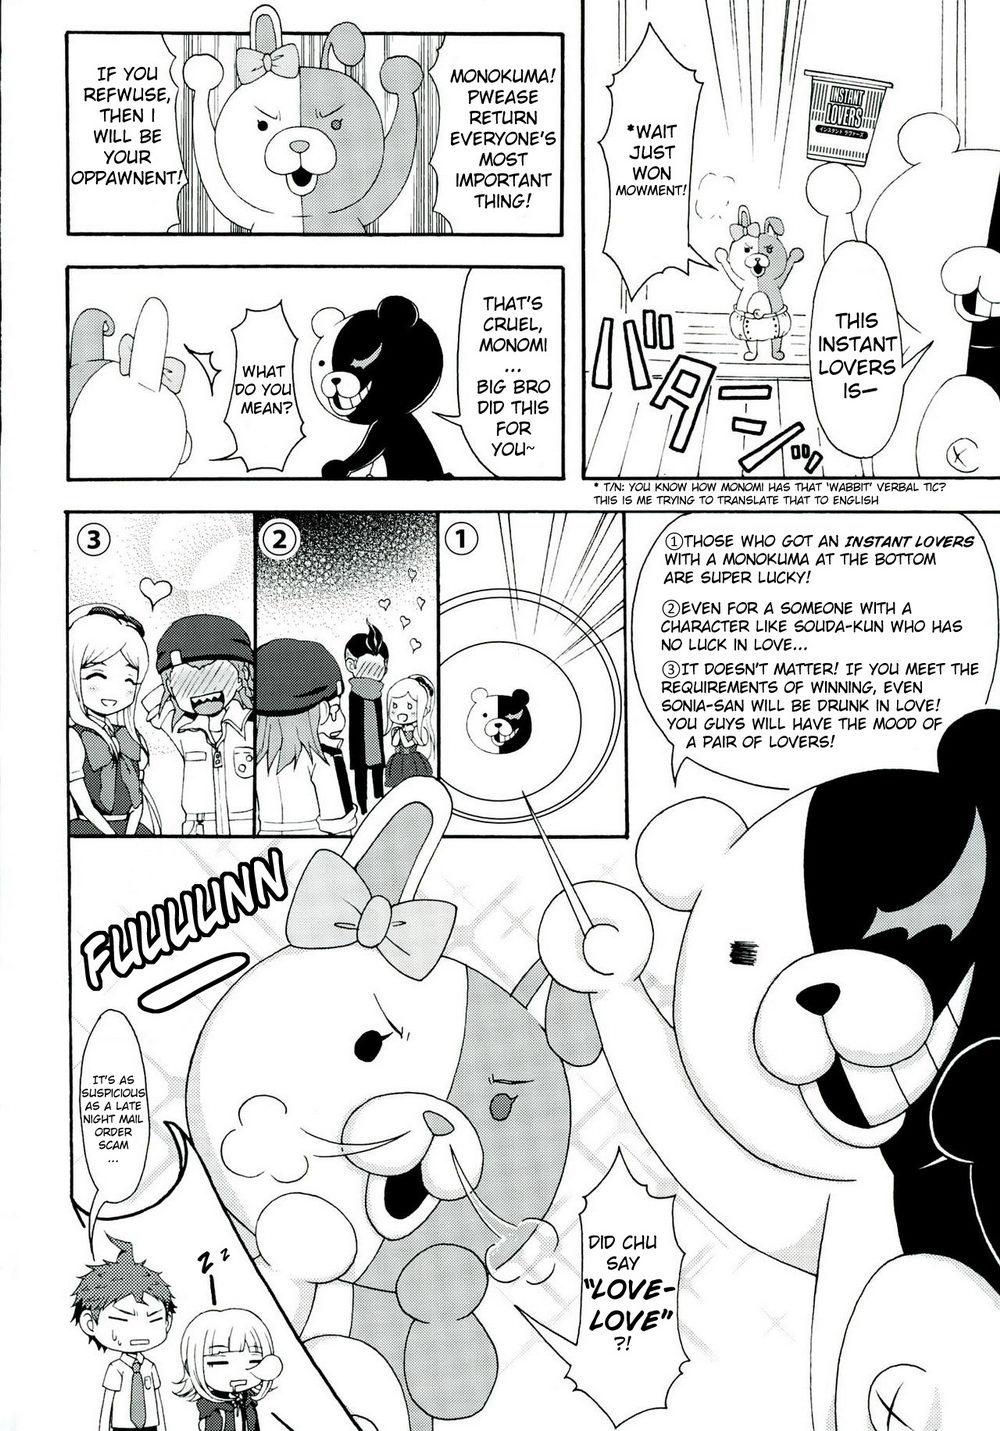 Cums INSTANT LOVERS - Danganronpa Freeteenporn - Page 10